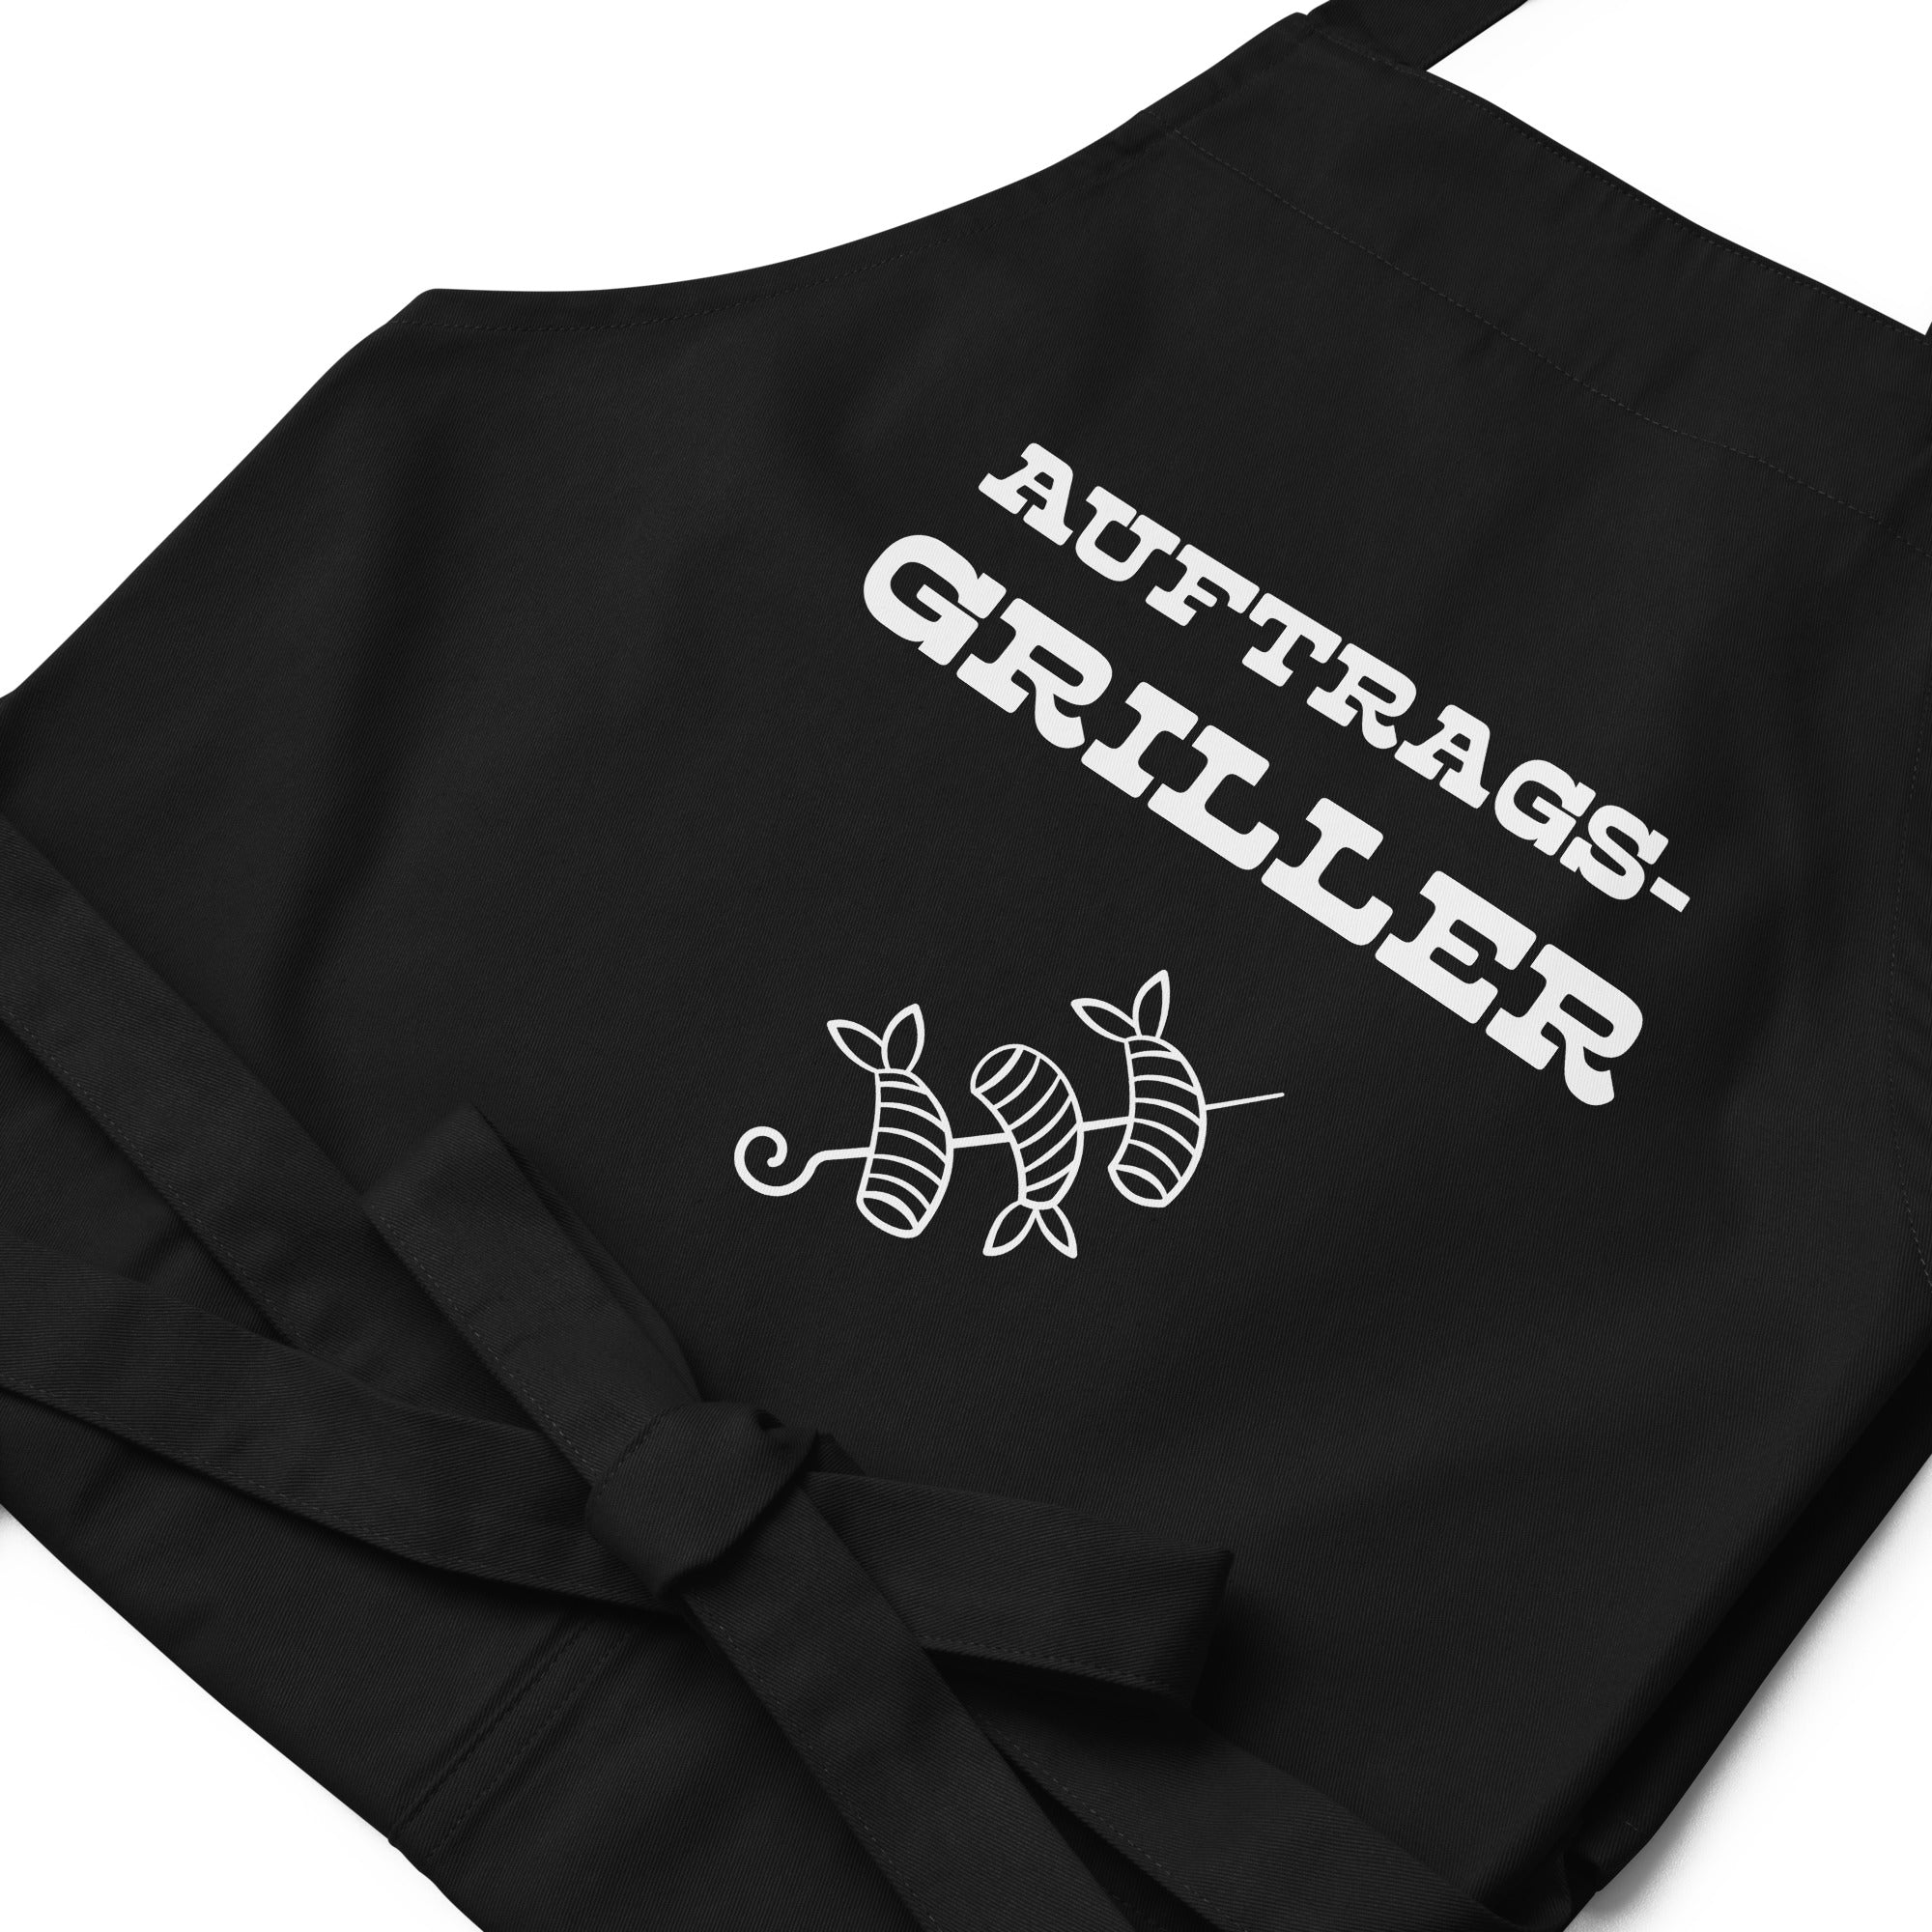 Grill - cooking apron - order griller - apron made of organic cotton